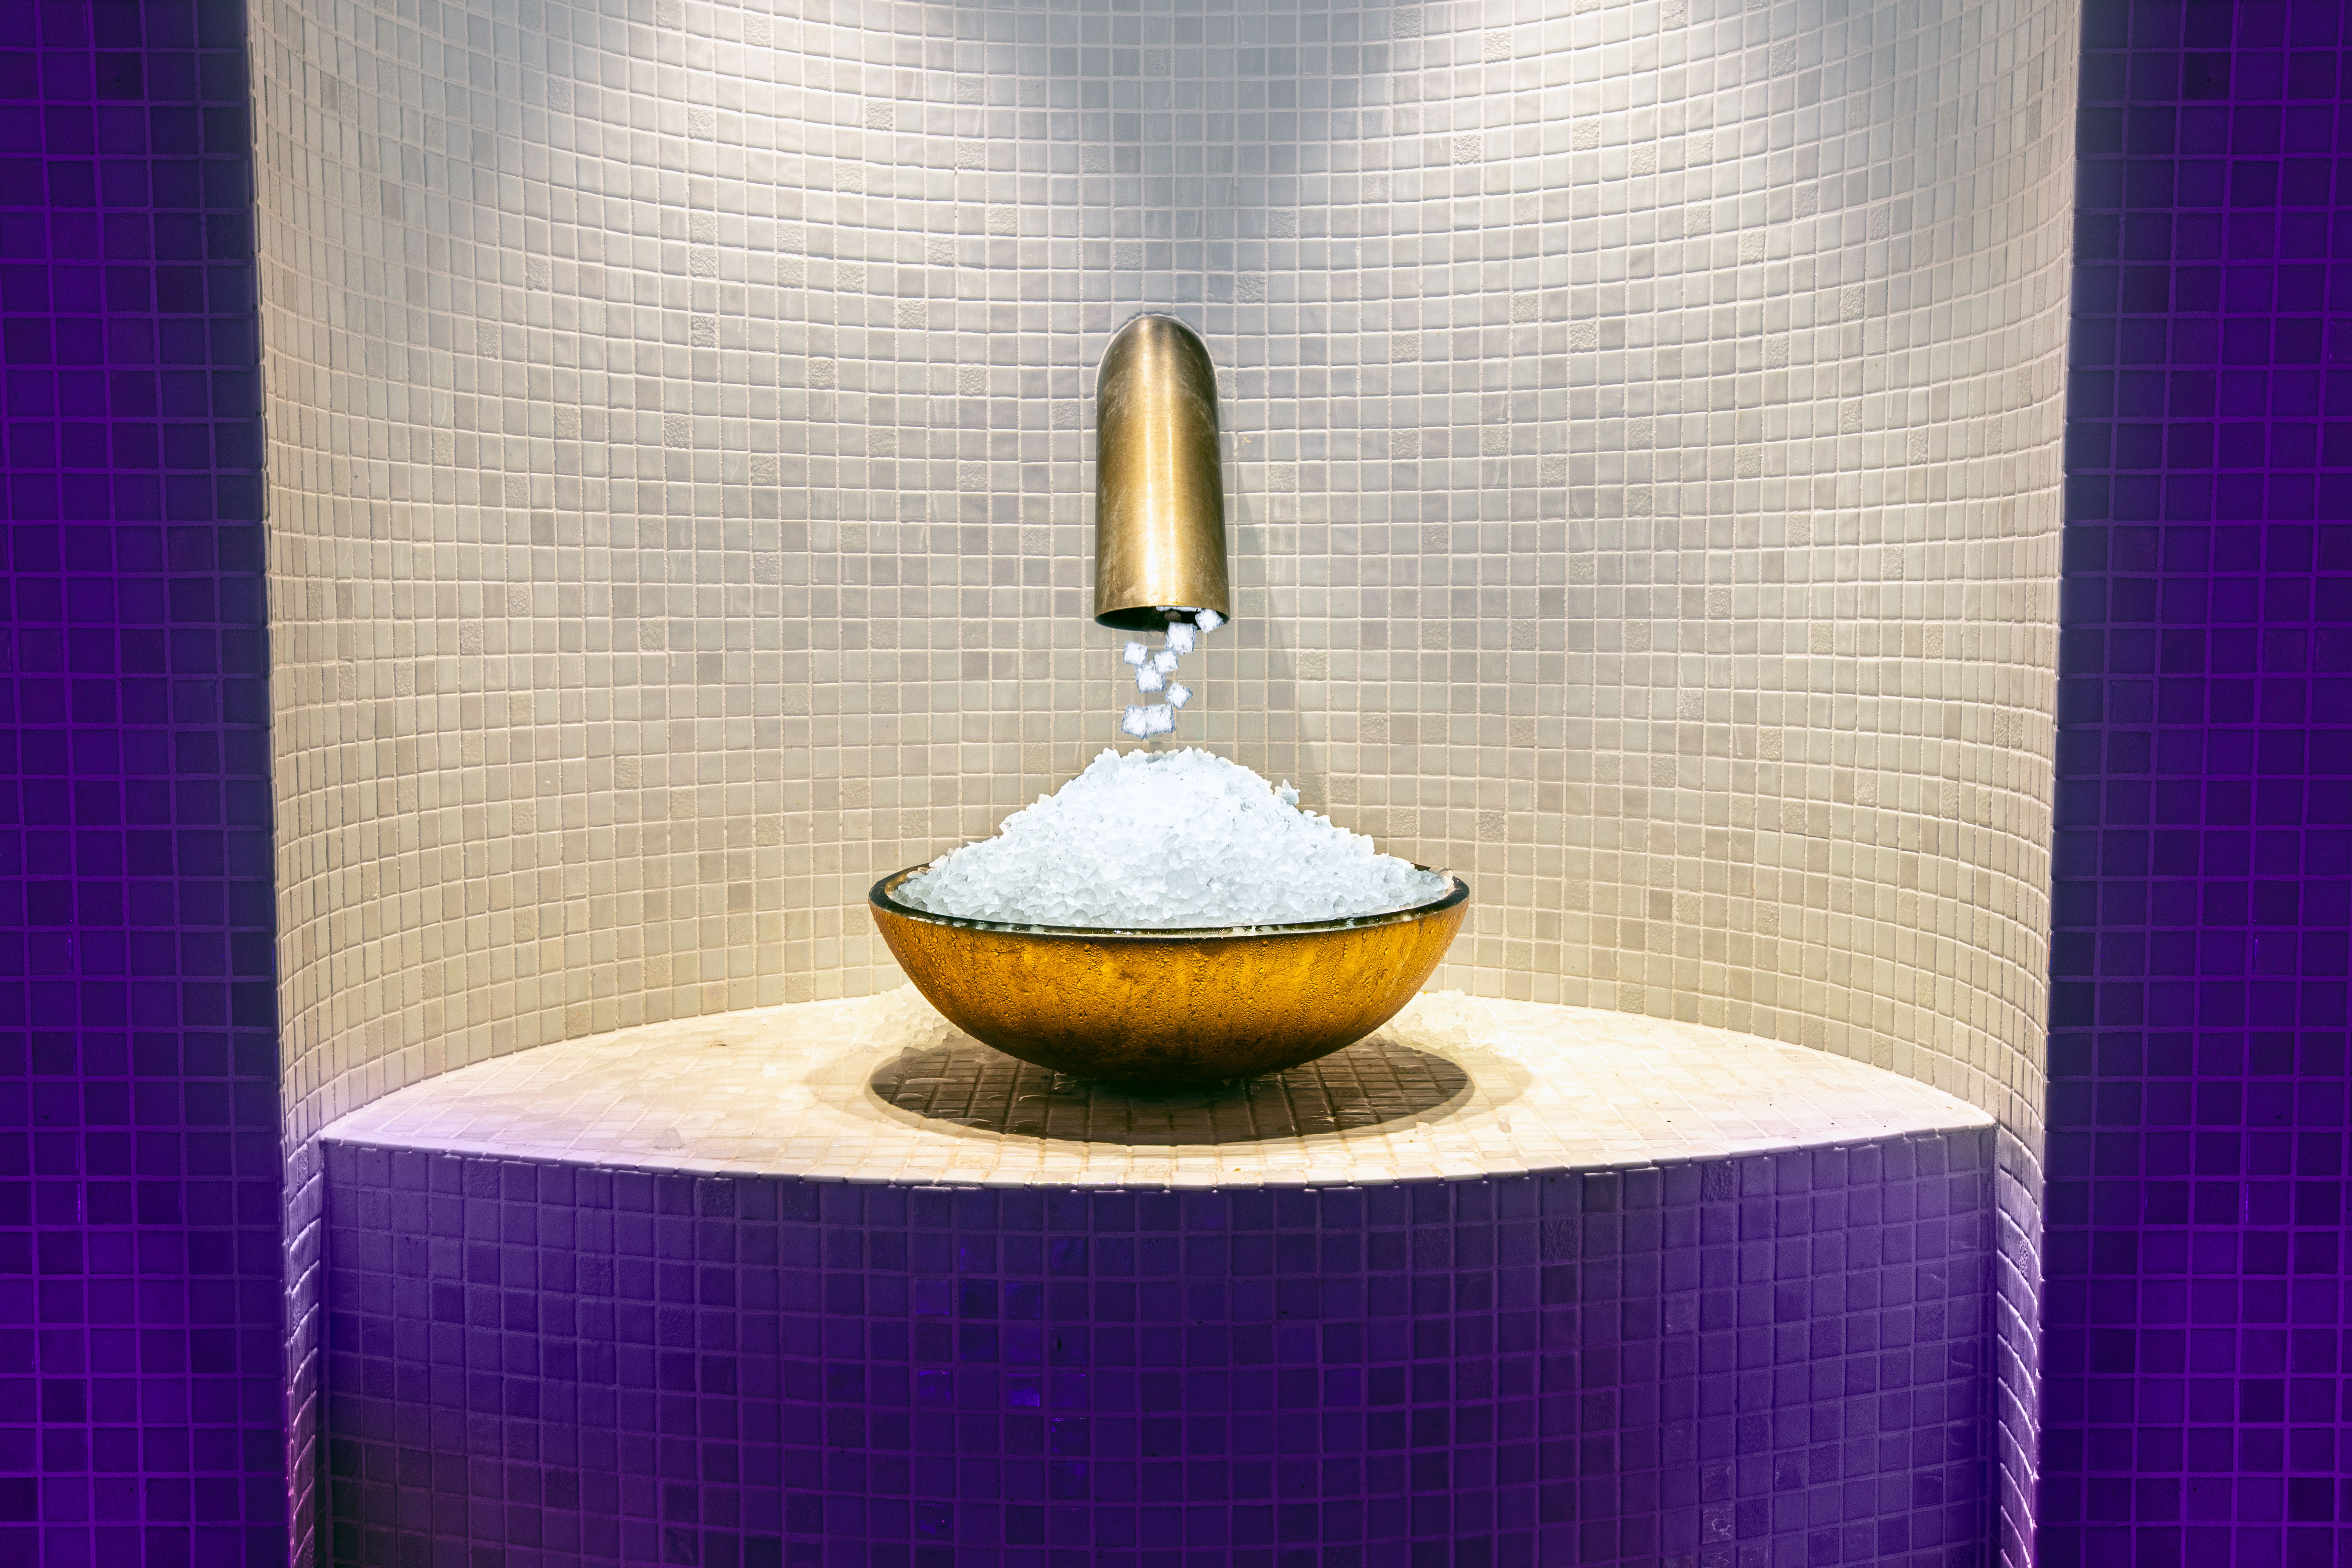 Afternoon Rasul And Treatment For Two, The Harrogate Spa At DoubleTree